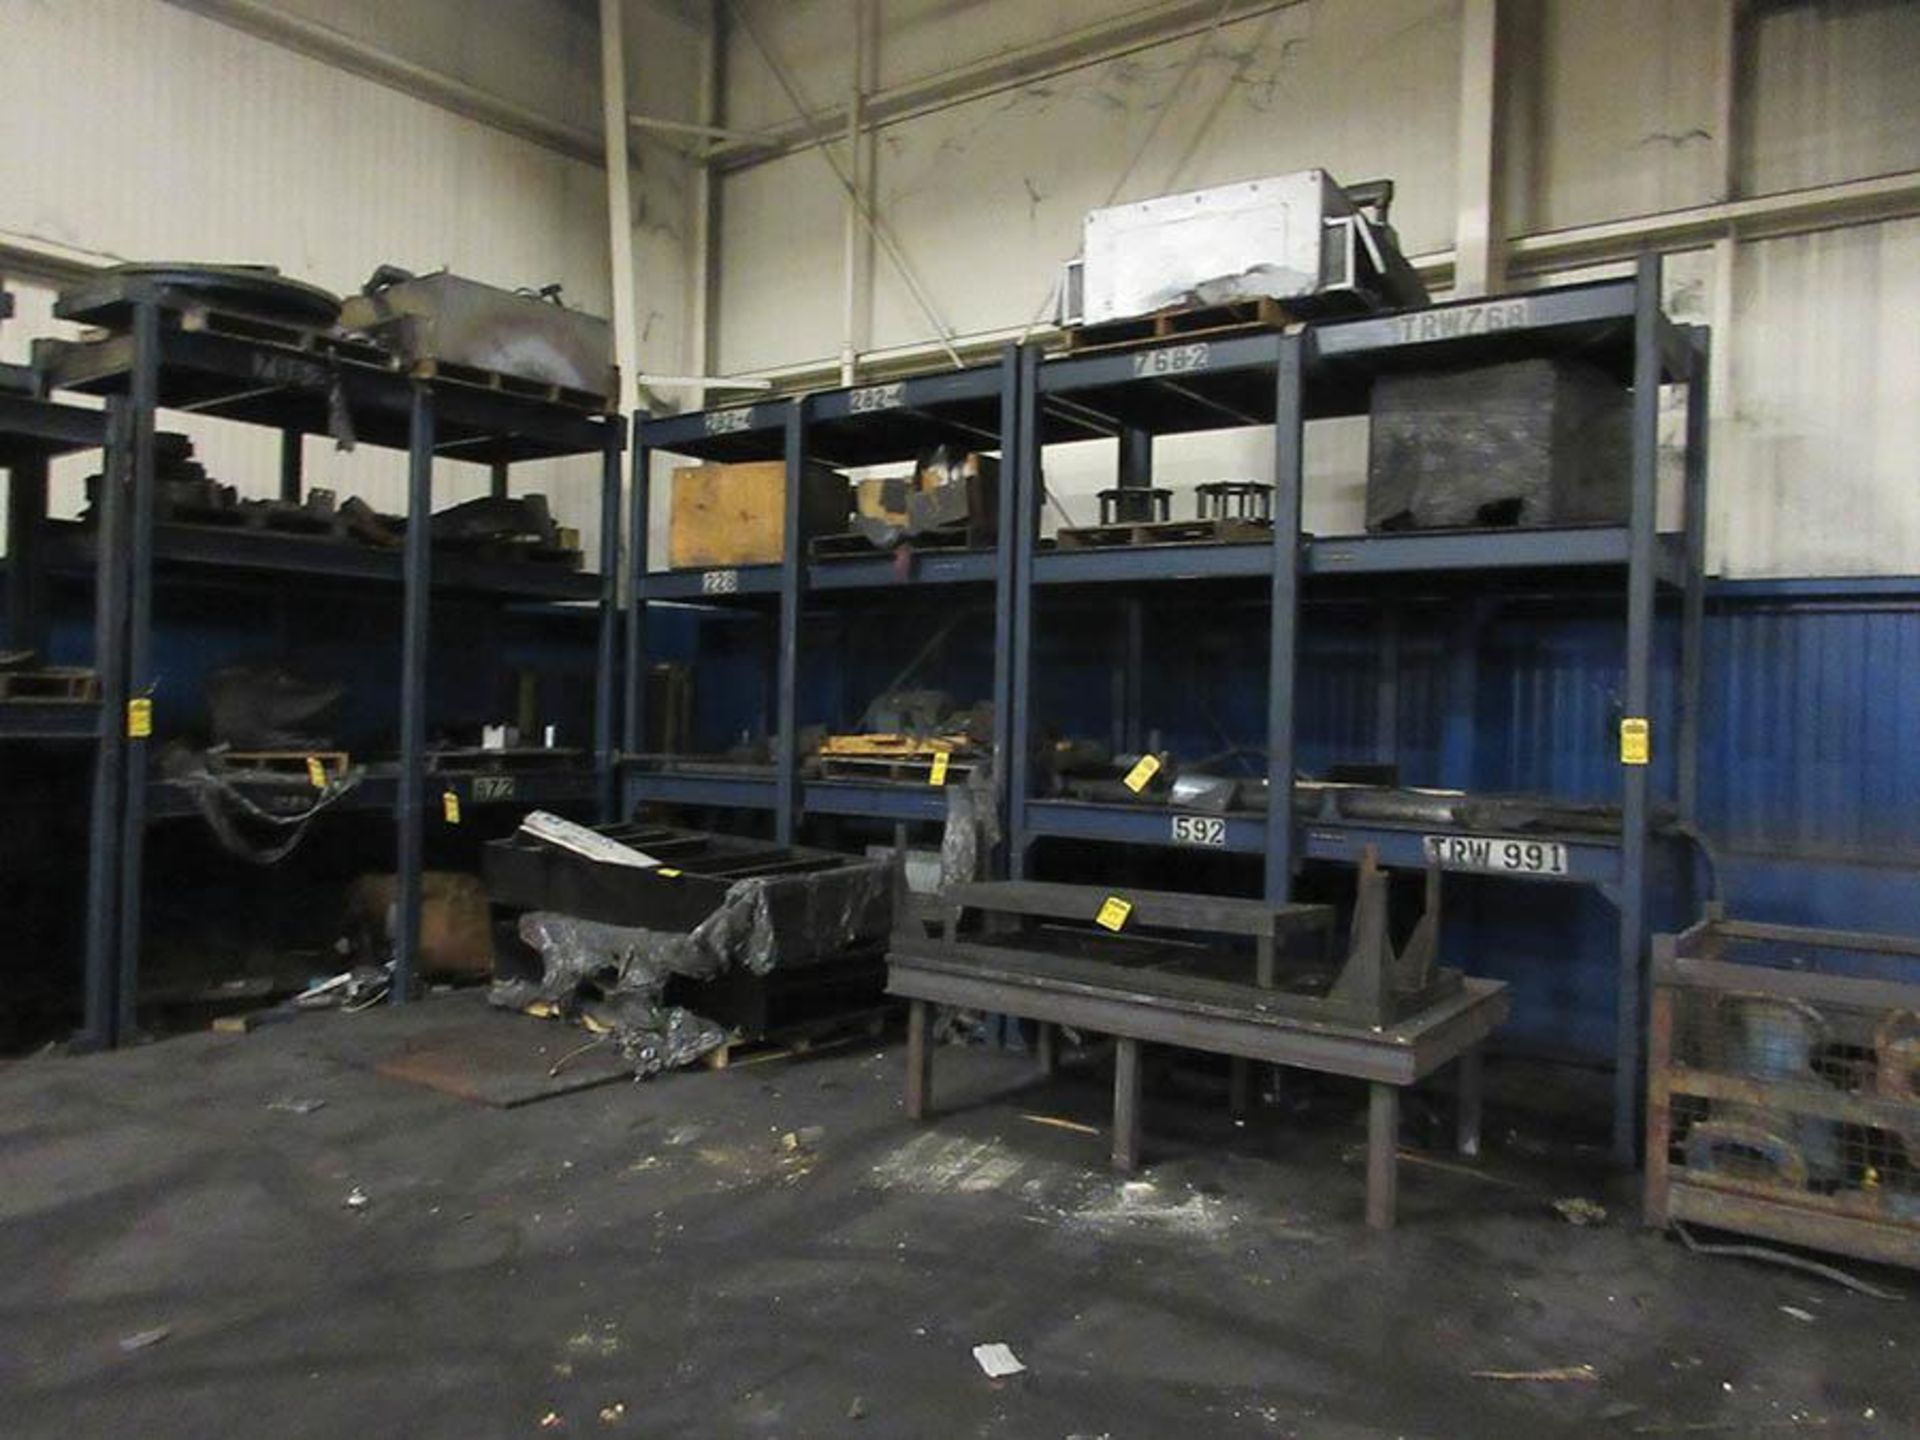 (4) DIE RACKS AND CONTENT, (3) @ 11' X 4' X 4' PER SECTION, (1) @ 10' X 17' X 4' O.A.